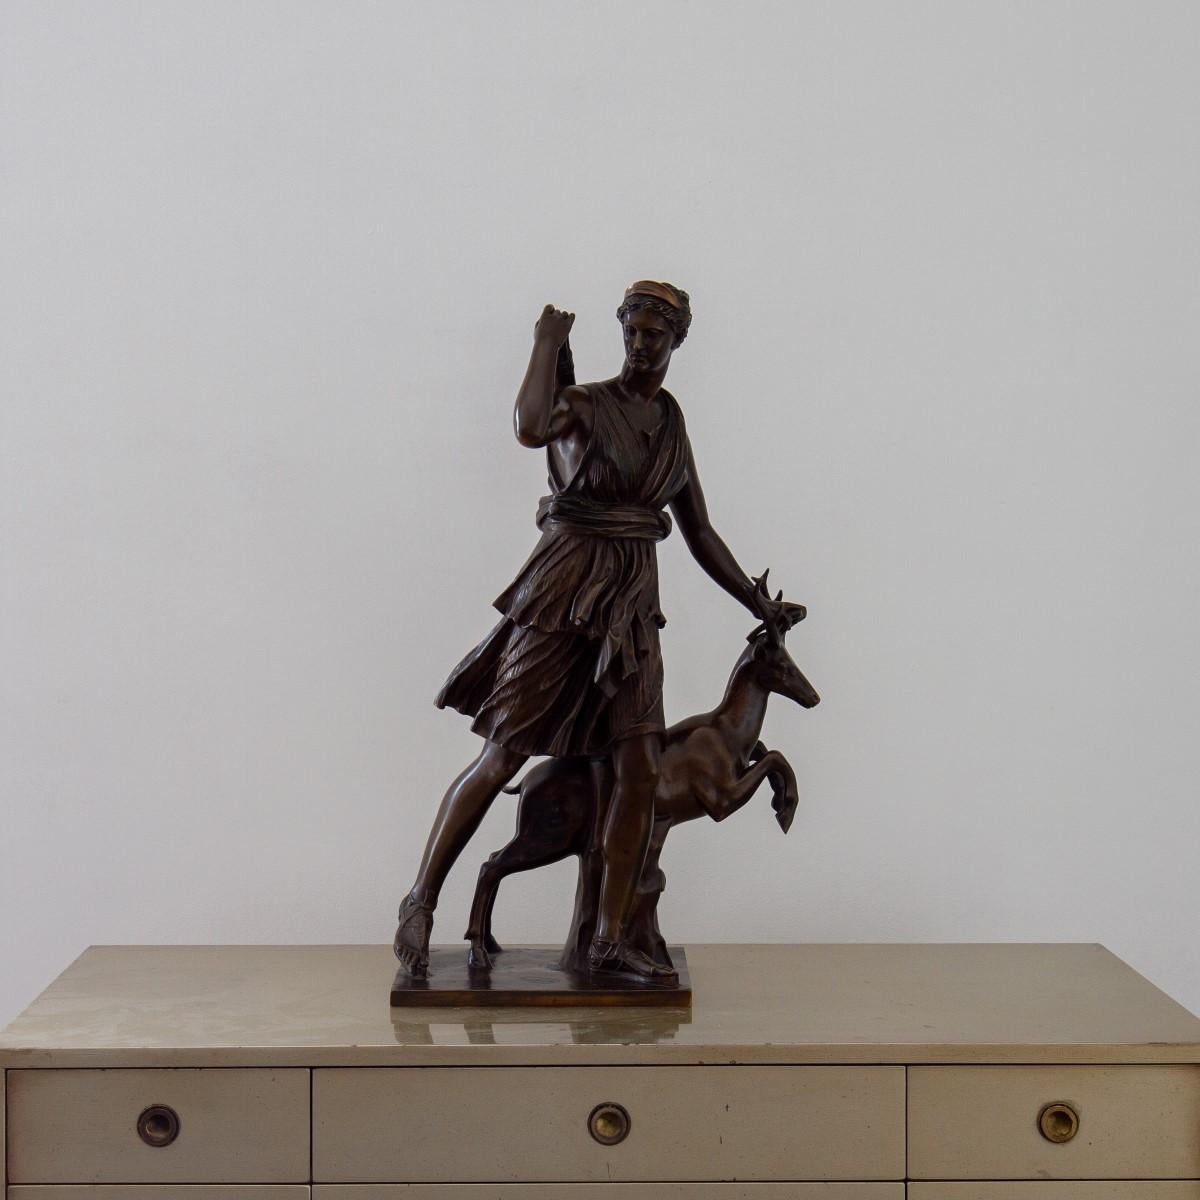 A late 19th century, French bronze of Diana the Huntress with a leaping deer, by 'Collas et Barbedienne' signed F. Barbedienne Fondeur and complete with the A Collas Seal.

Achille Collas (1795-1859) invented a machine which involved copying